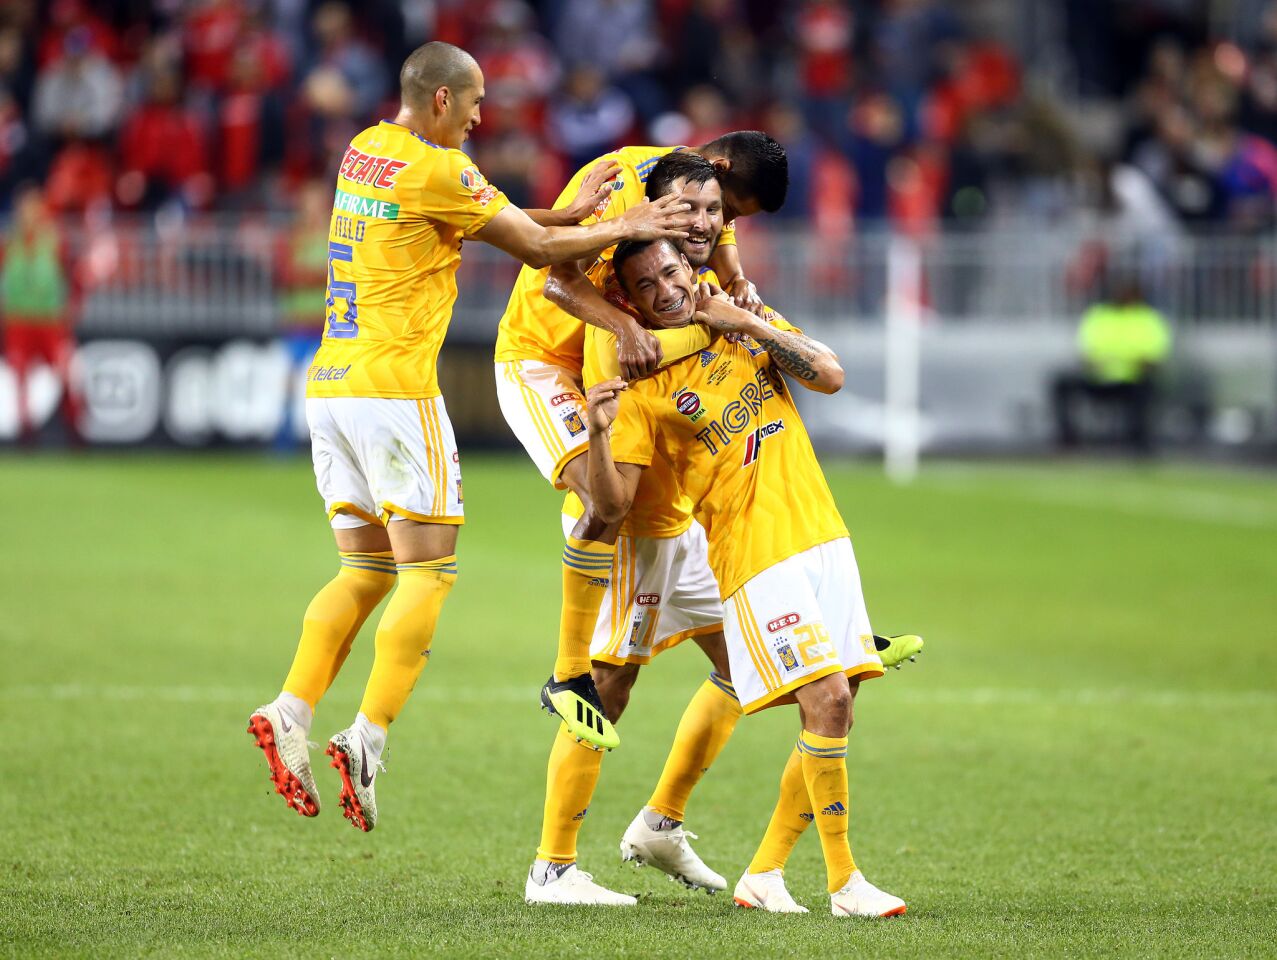 TORONTO, ON - SEPTEMBER 19: Jesús Dueñas #29 of Tigres UANL celebrates a goal with teammates during the second half of the 2018 Campeones Cup Final against Toronto FC at BMO Field on September 19, 2018 in Toronto, Canada. (Photo by Vaughn Ridley/Getty Images) ** OUTS - ELSENT, FPG, CM - OUTS * NM, PH, VA if sourced by CT, LA or MoD **